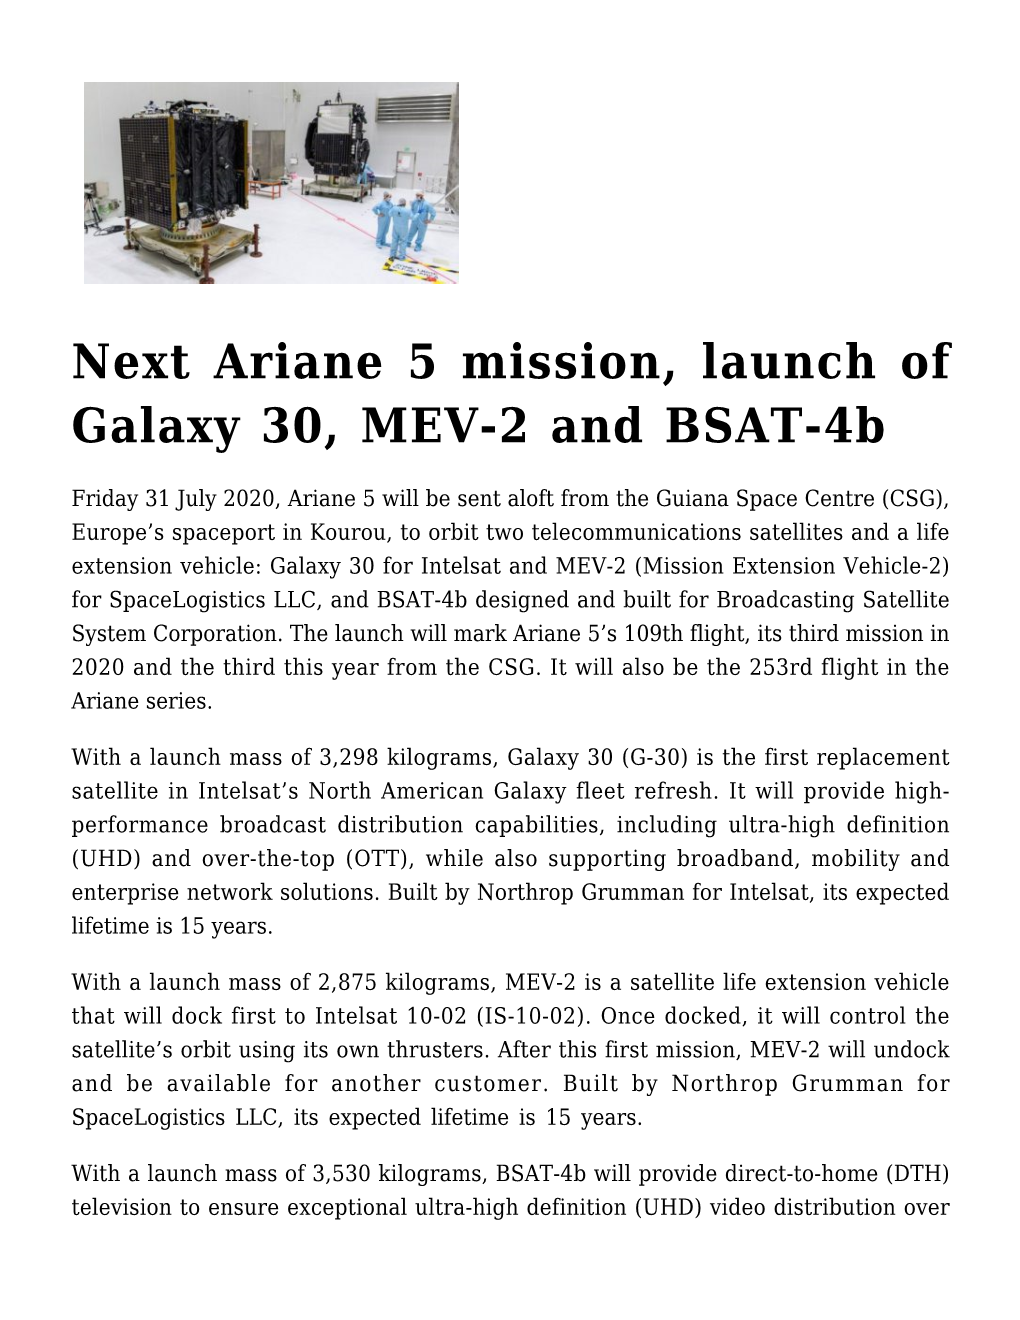 Next Ariane 5 Mission, Launch of Galaxy 30, MEV-2 and BSAT-4B